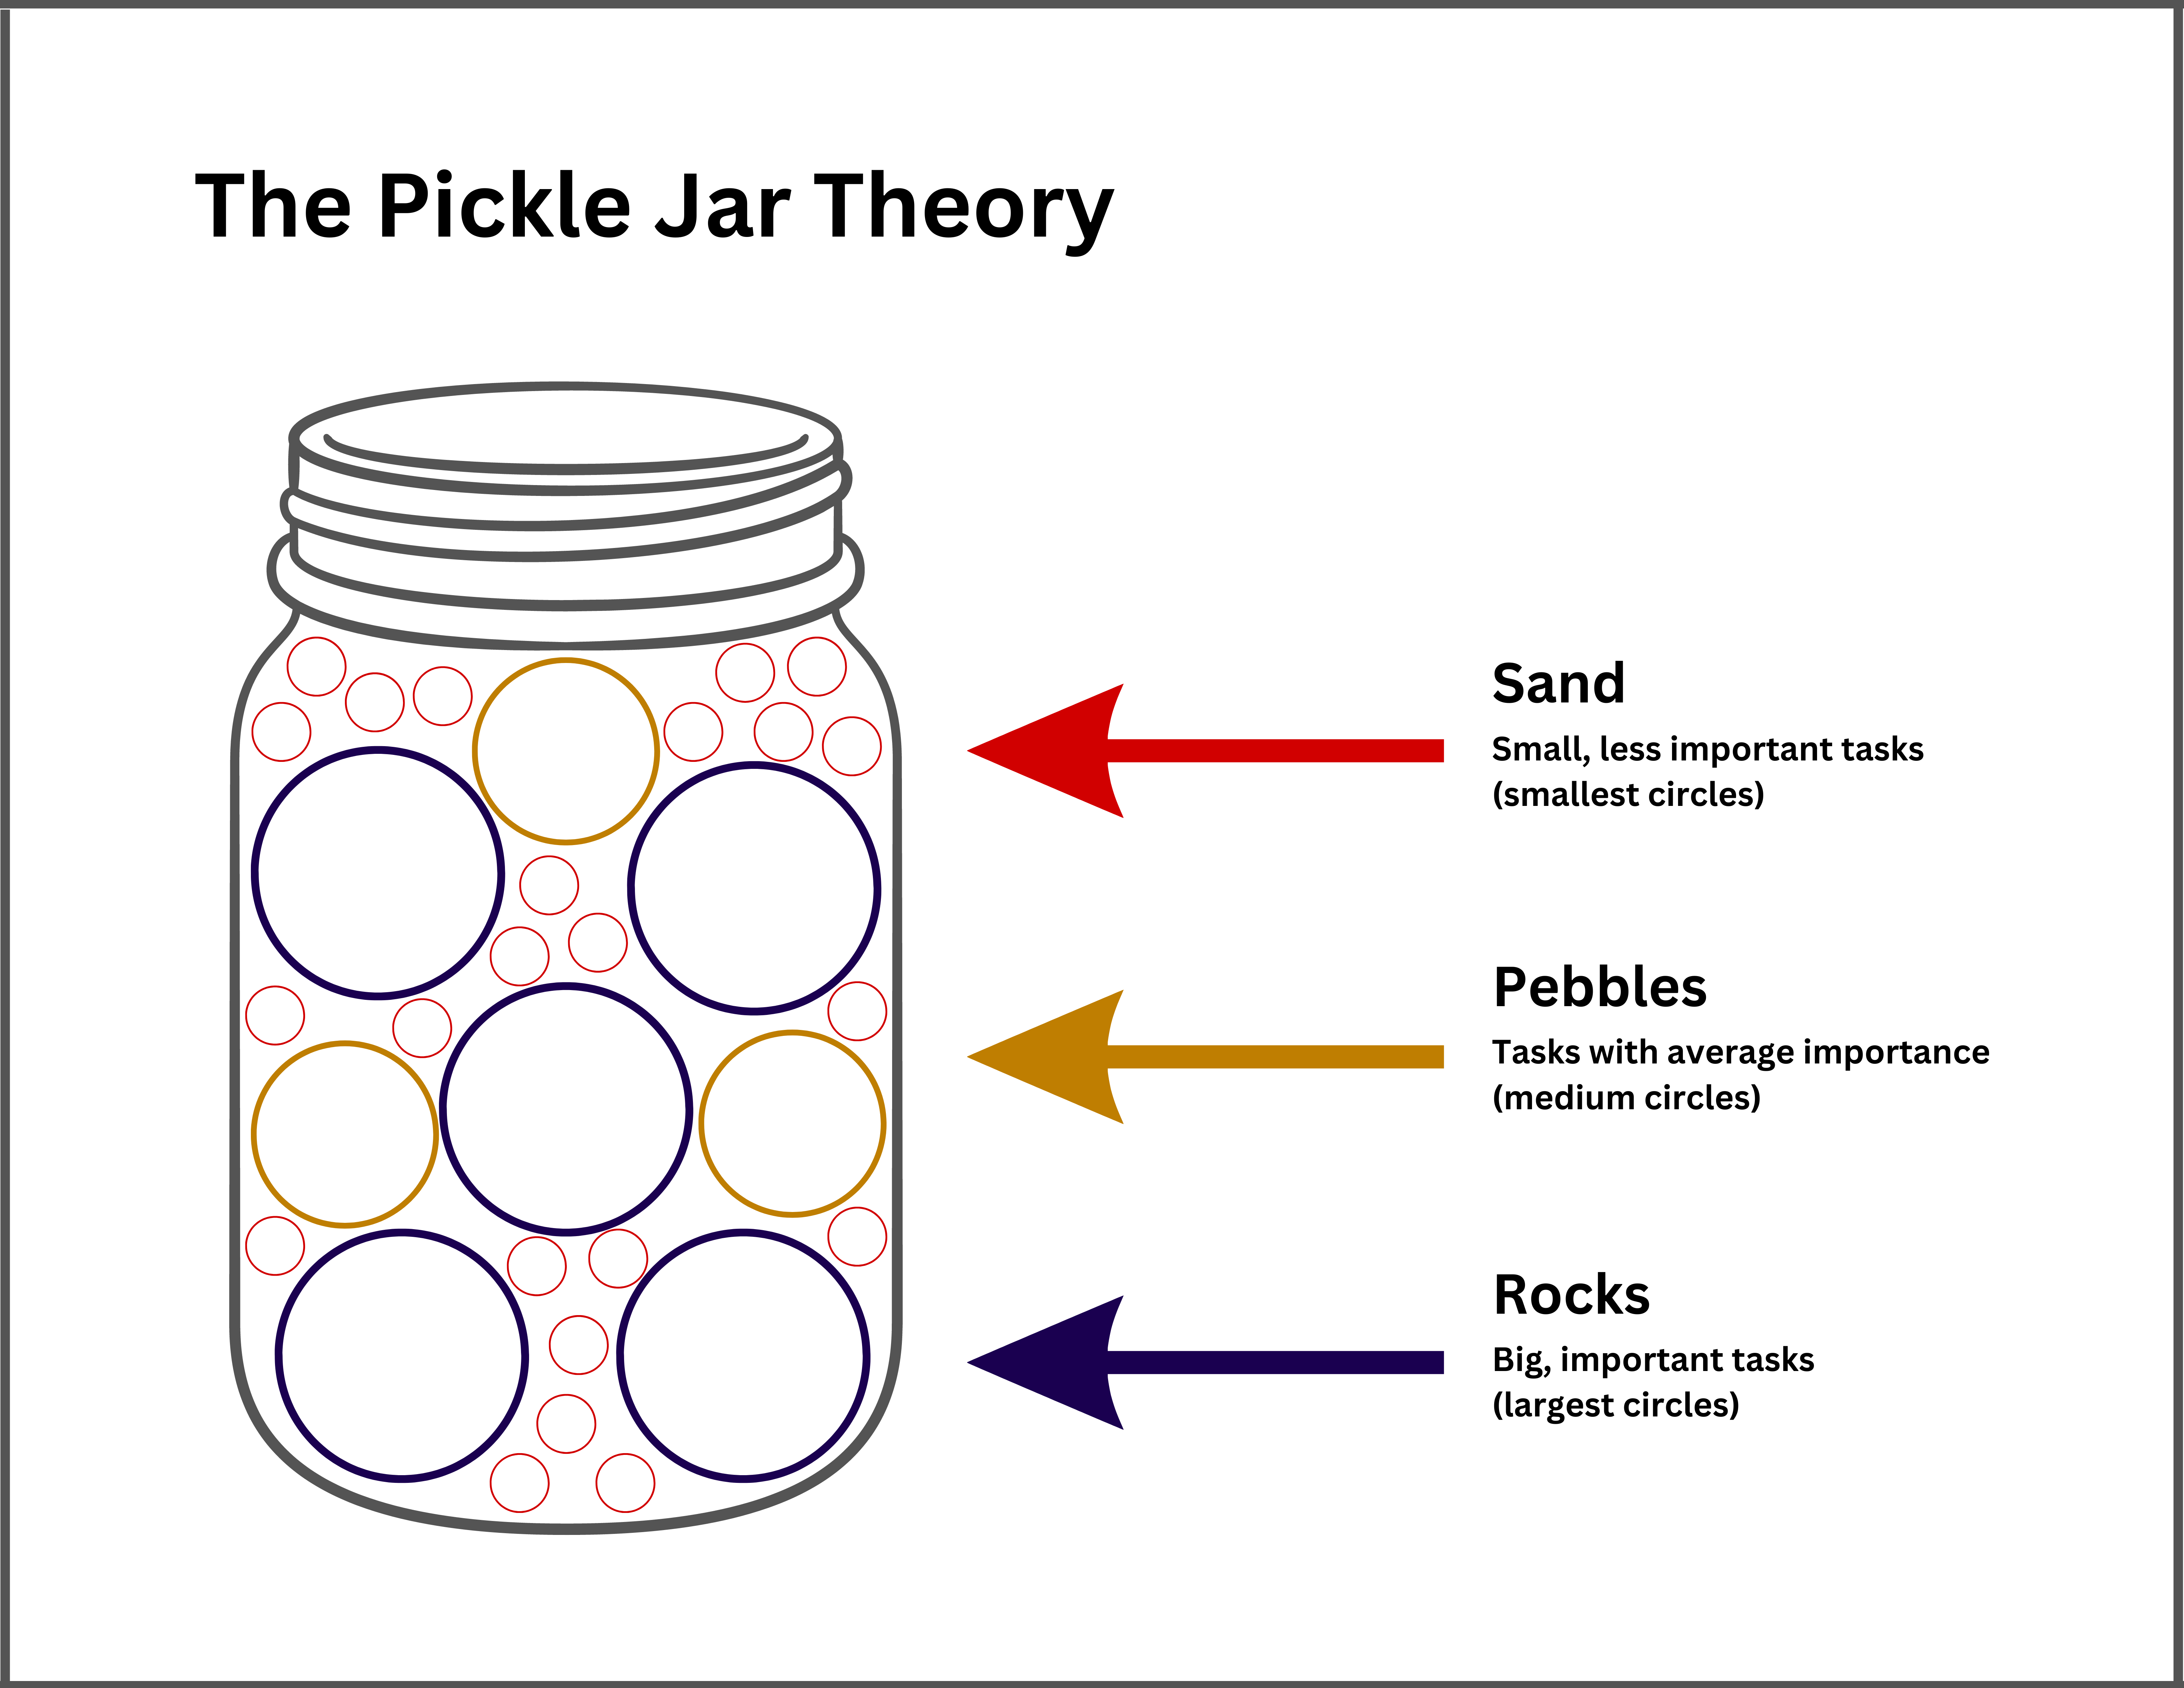 Poster depicting a jar that’s contents have been arranged to fit large circles (rocks), medium circles (pebbles), and small circles (sand), demonstrating effective prioritization.